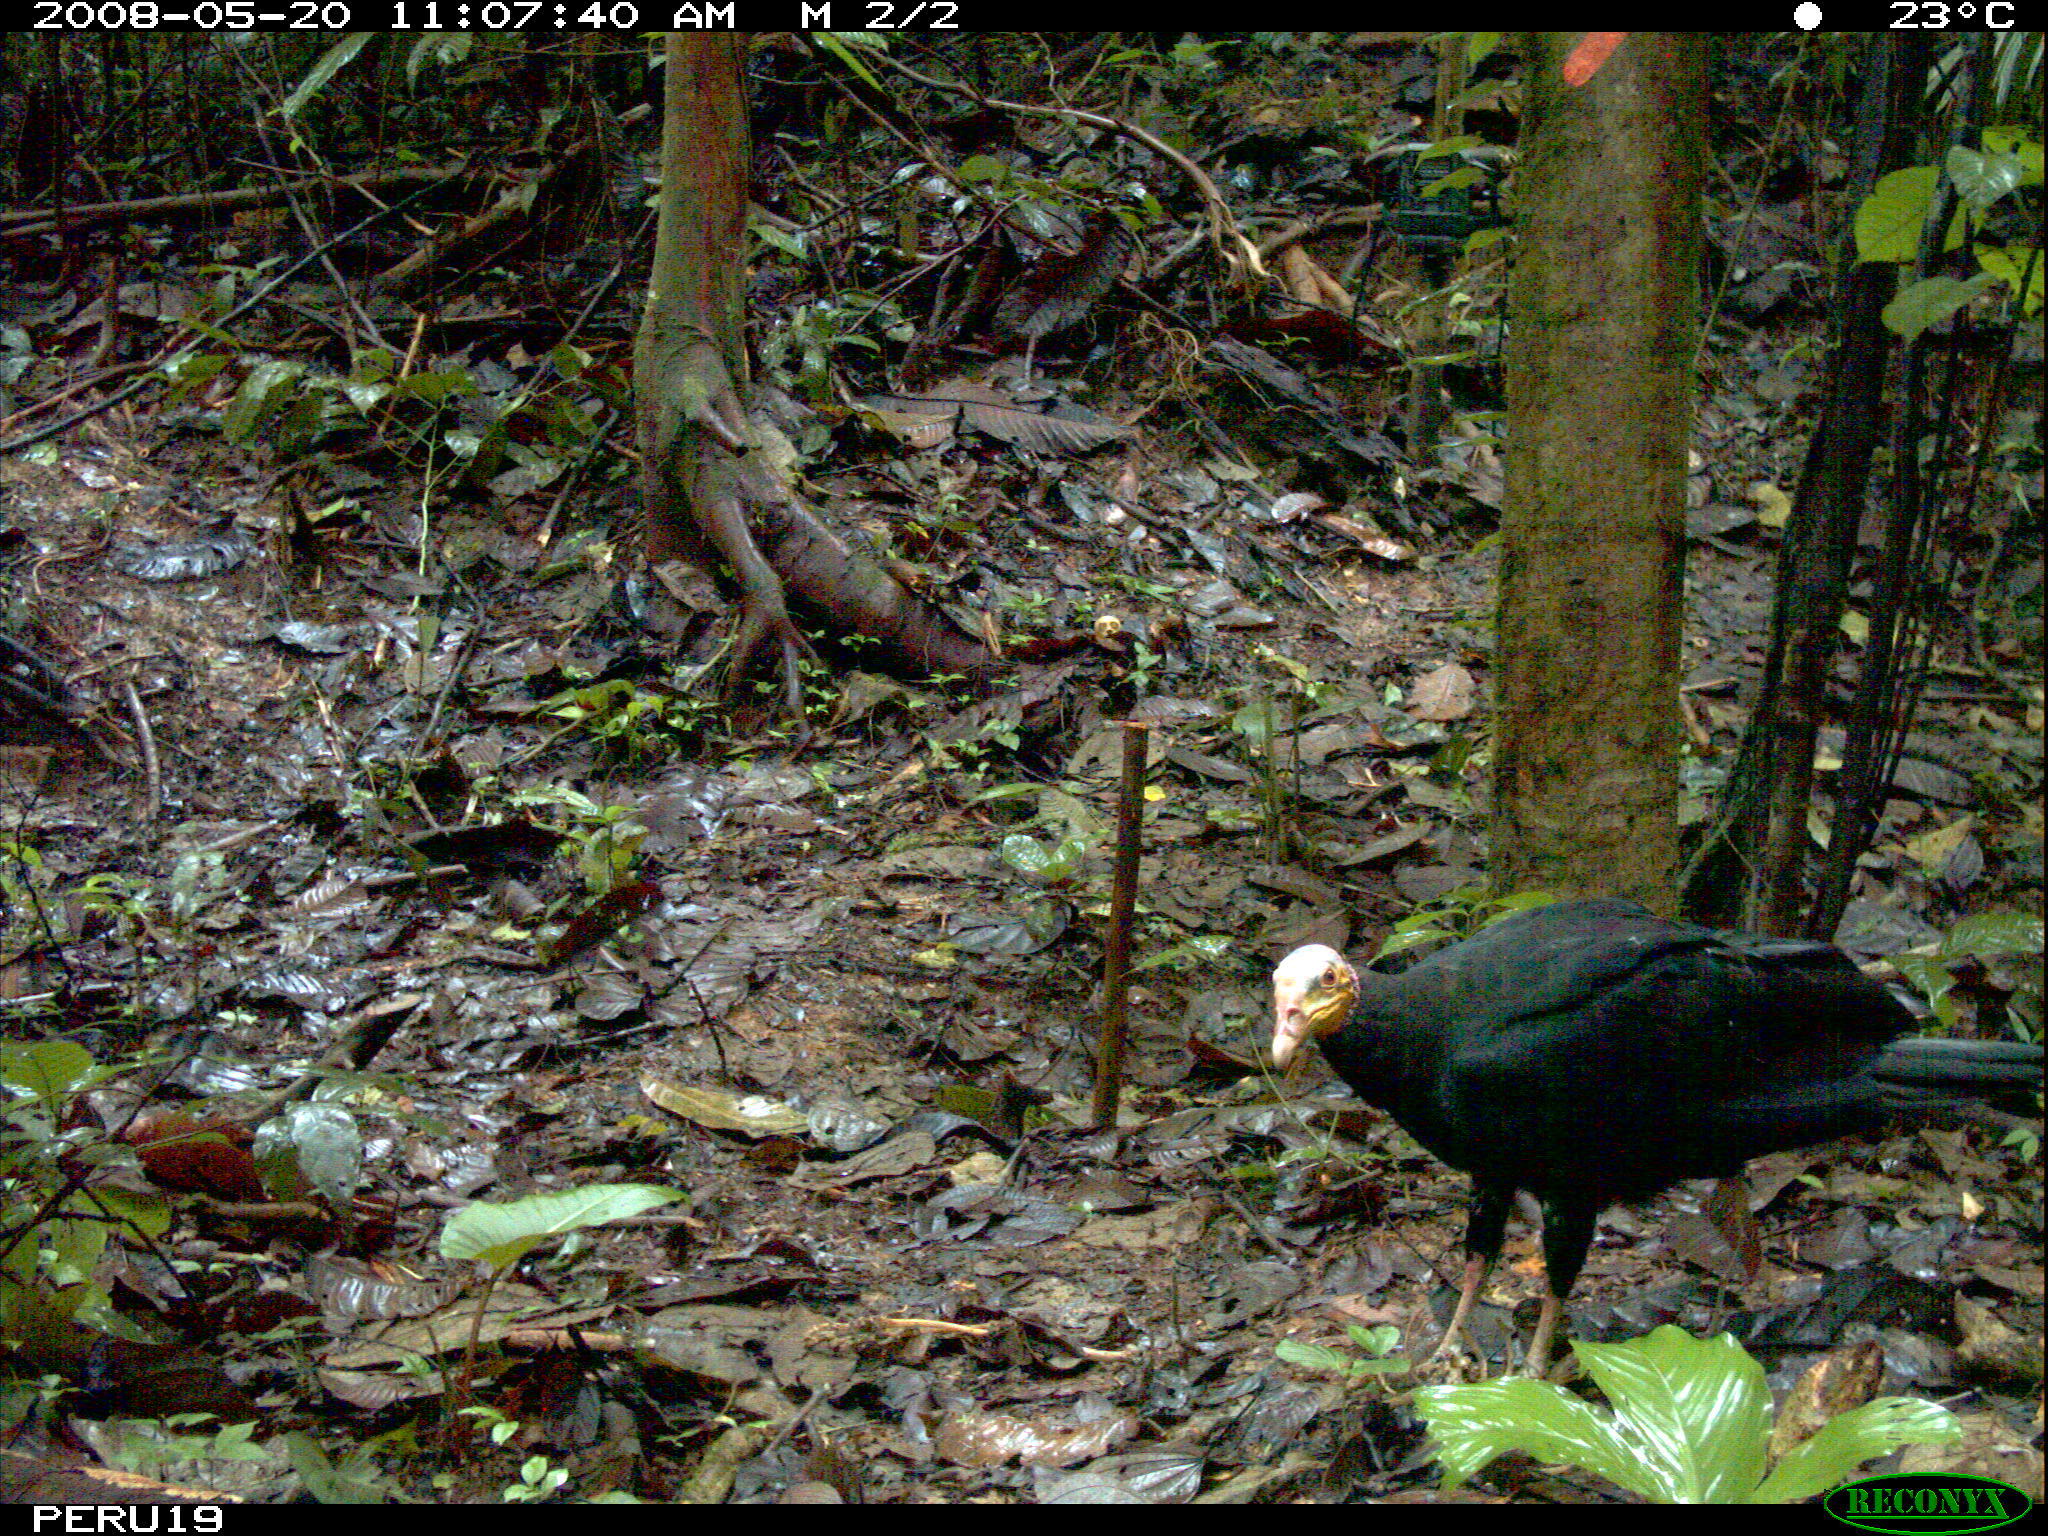 Image of Greater Yellow-headed Vulture